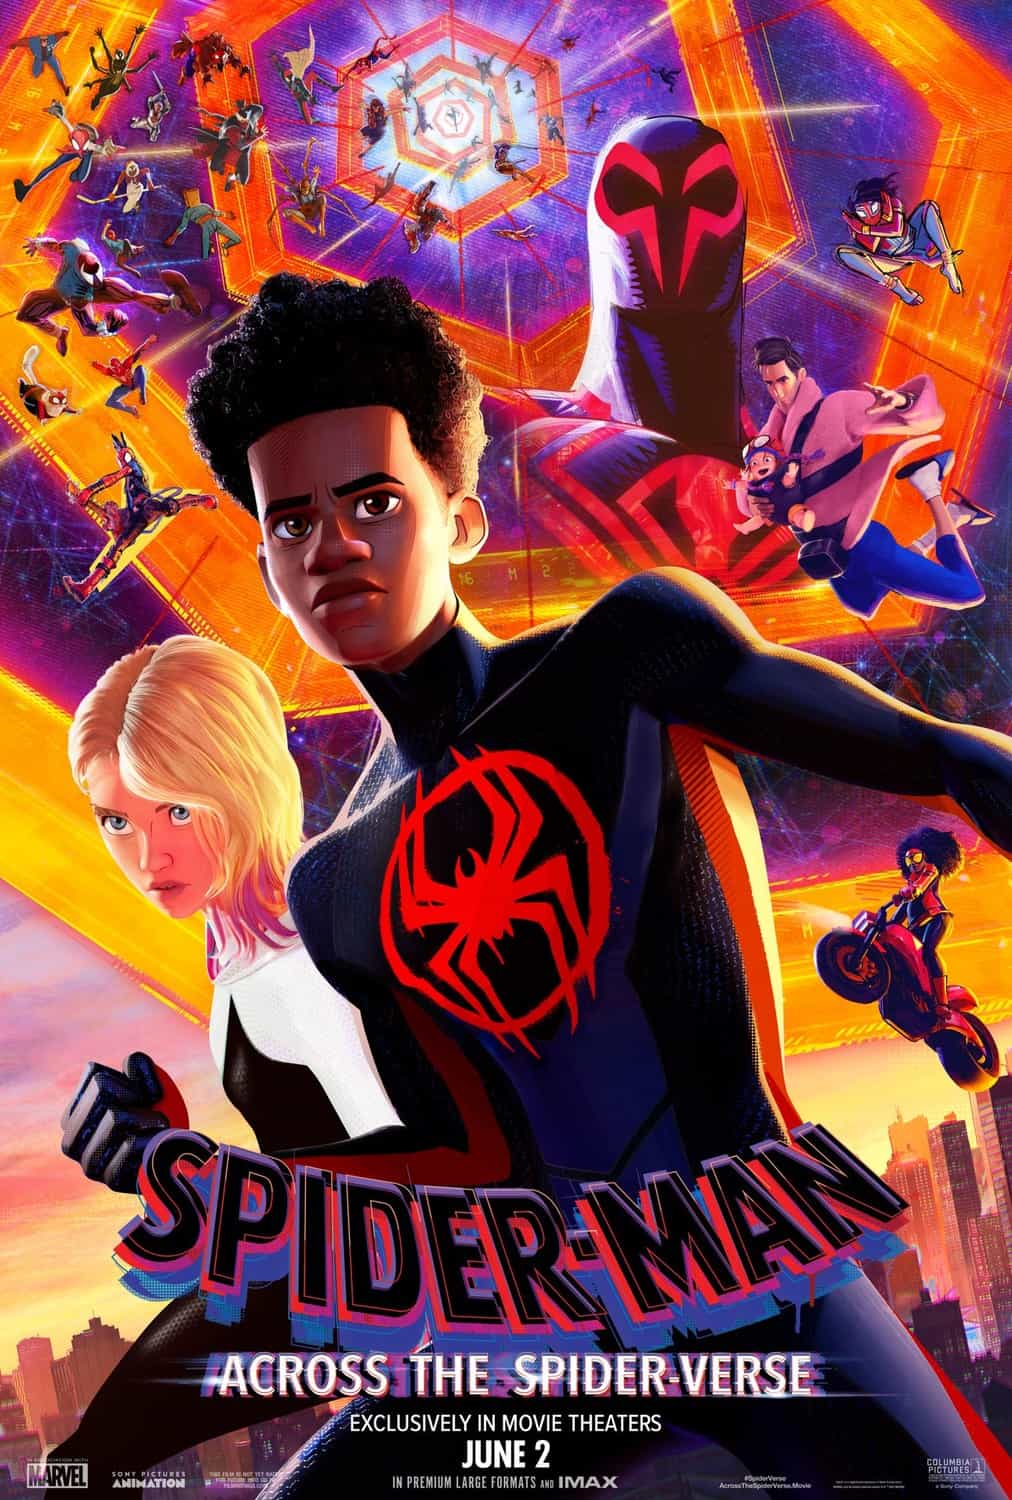 Global Box Office Weekend Report 2nd - 4th June 2023:  Spider-Man: Across the Spider-Verse tops the global box office on its debut with a $208 Million gross